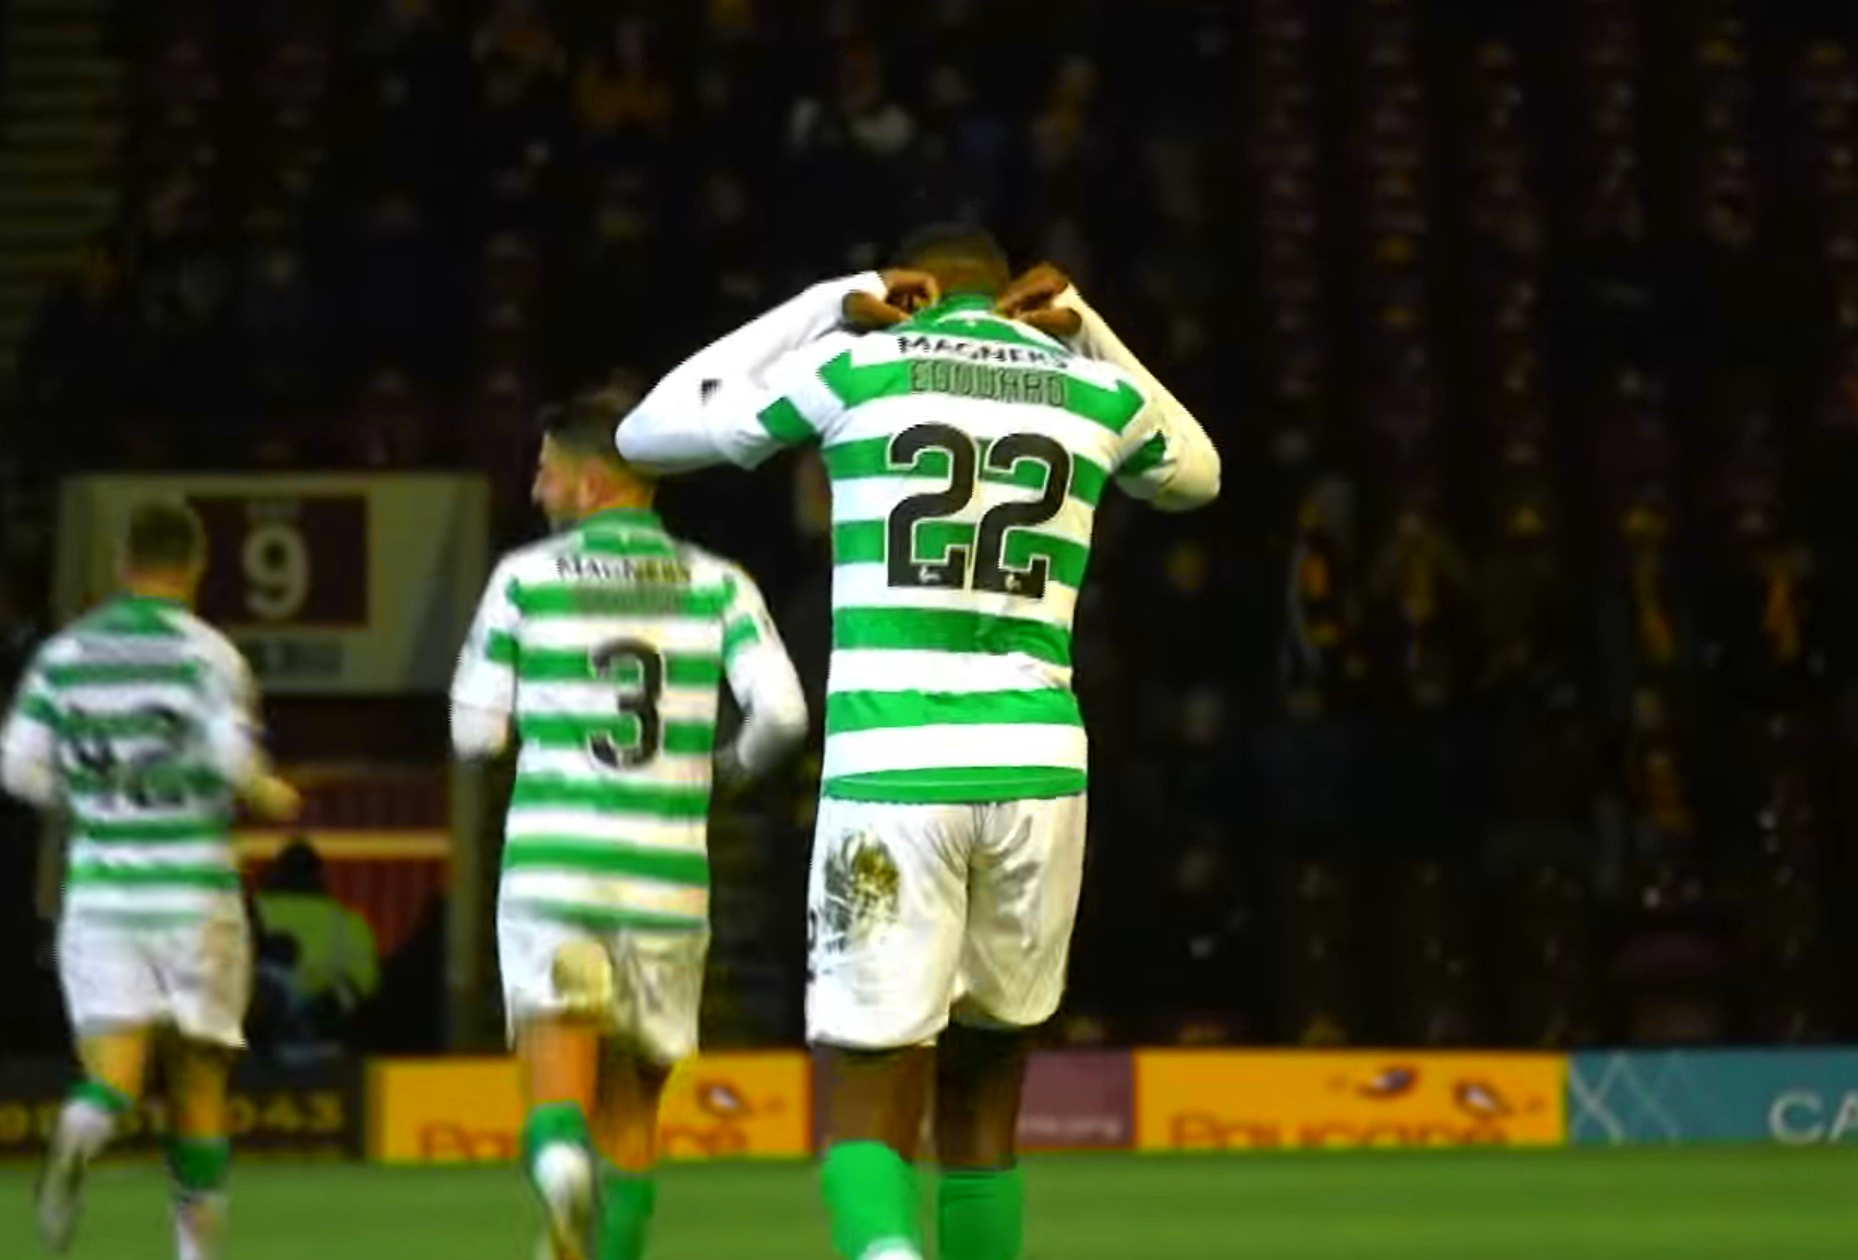 Spitting Fire: Odsonne Edouard performance highlights vs Motherwell with Zone 2’s ‘No Censor’ in the background